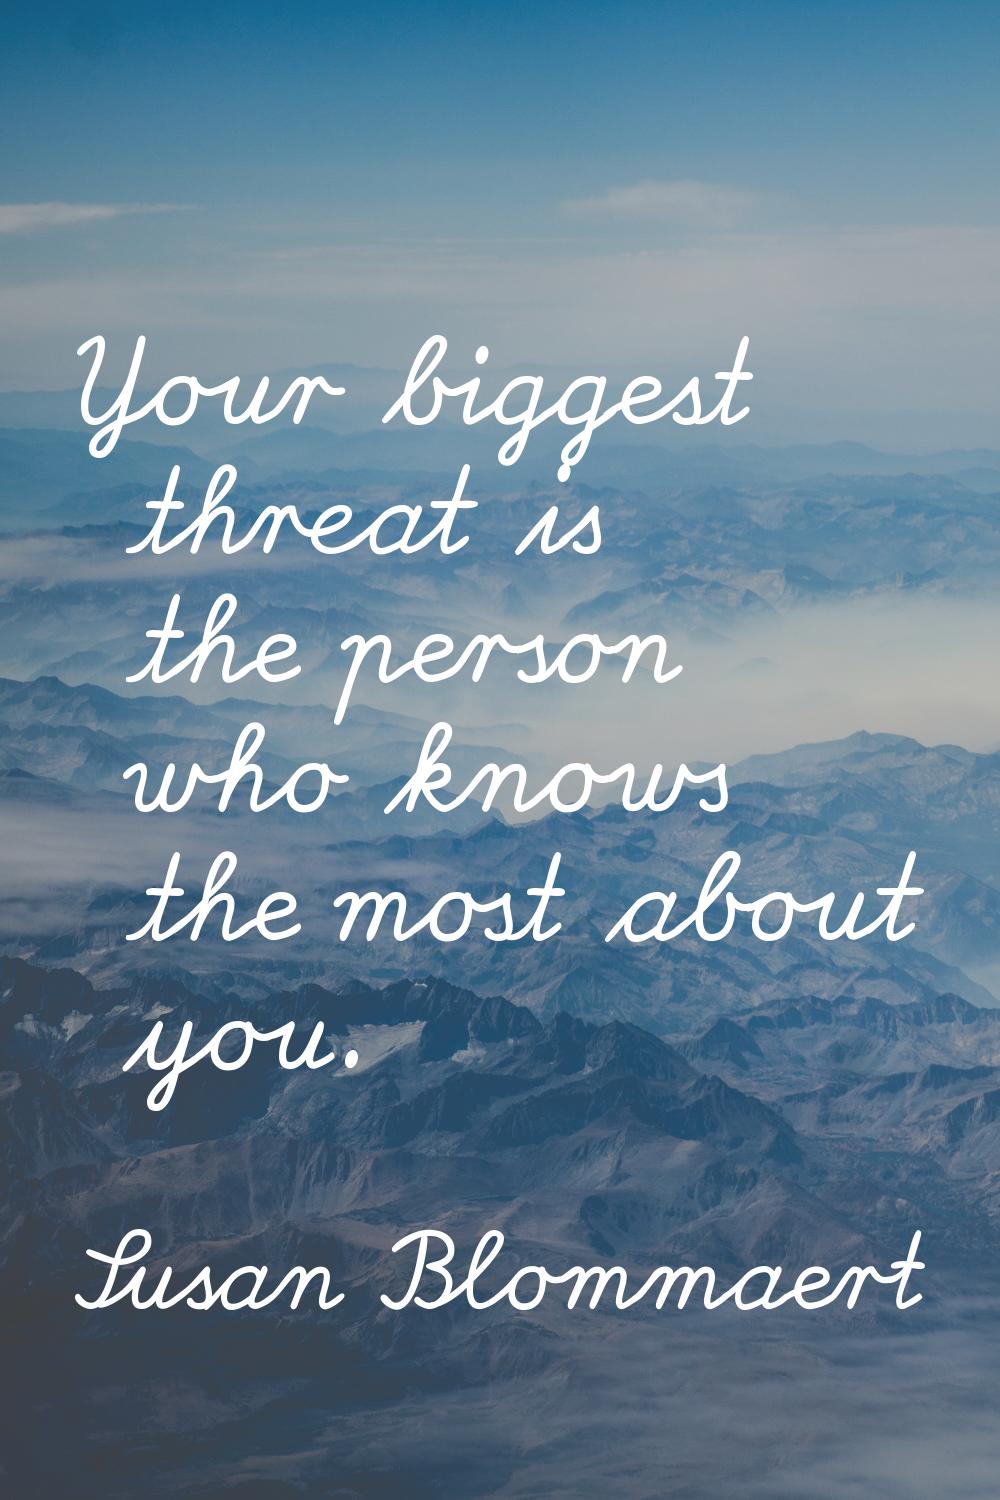 Your biggest threat is the person who knows the most about you.